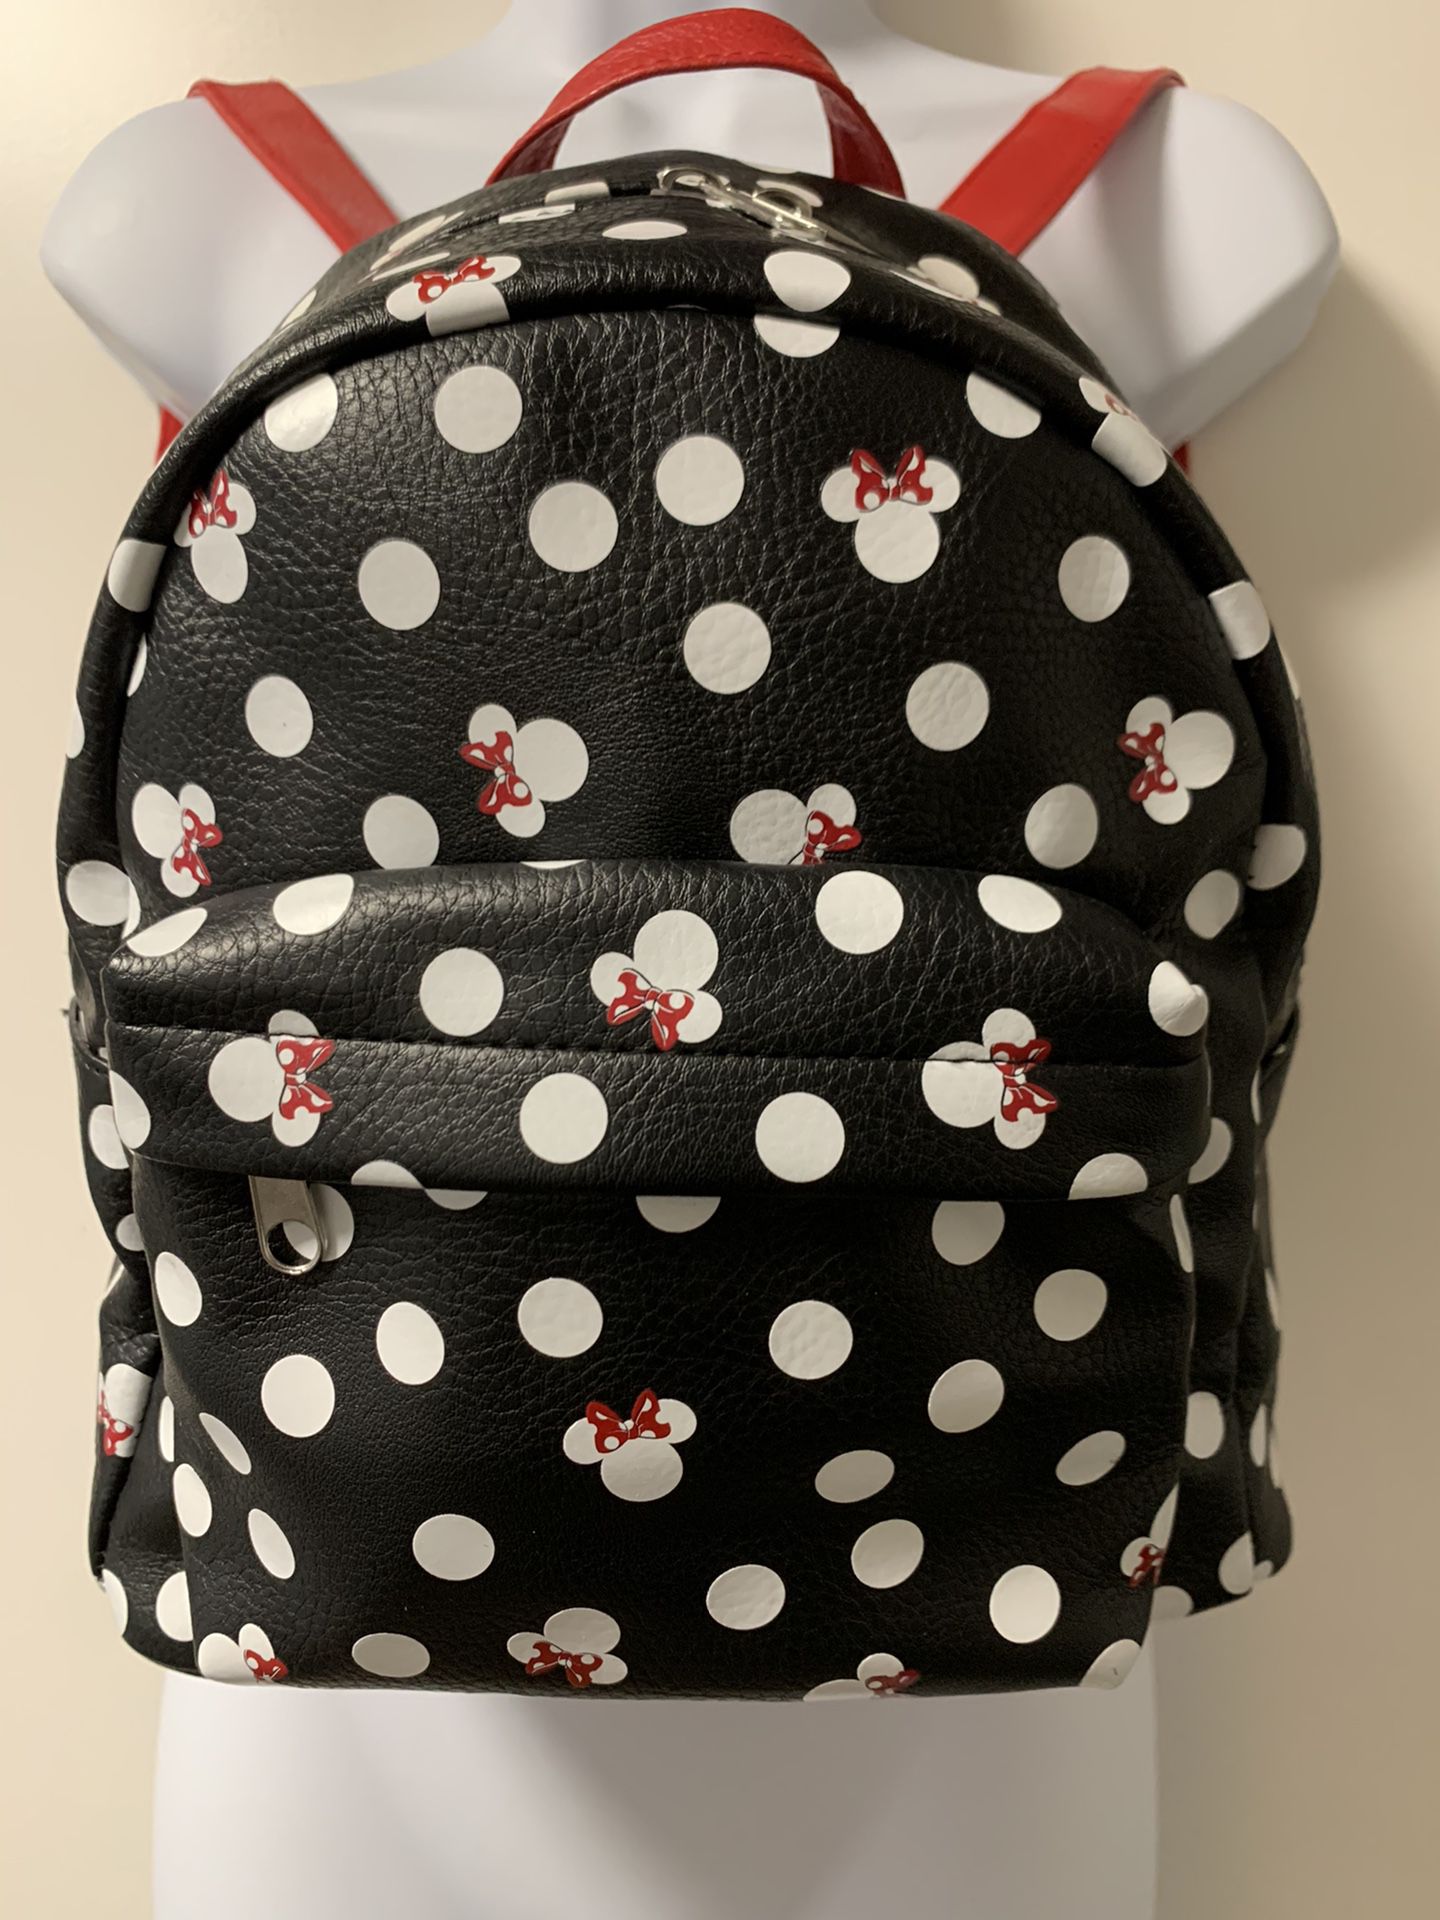 Disney Minnie Mouse Backpack- so cute and like New!